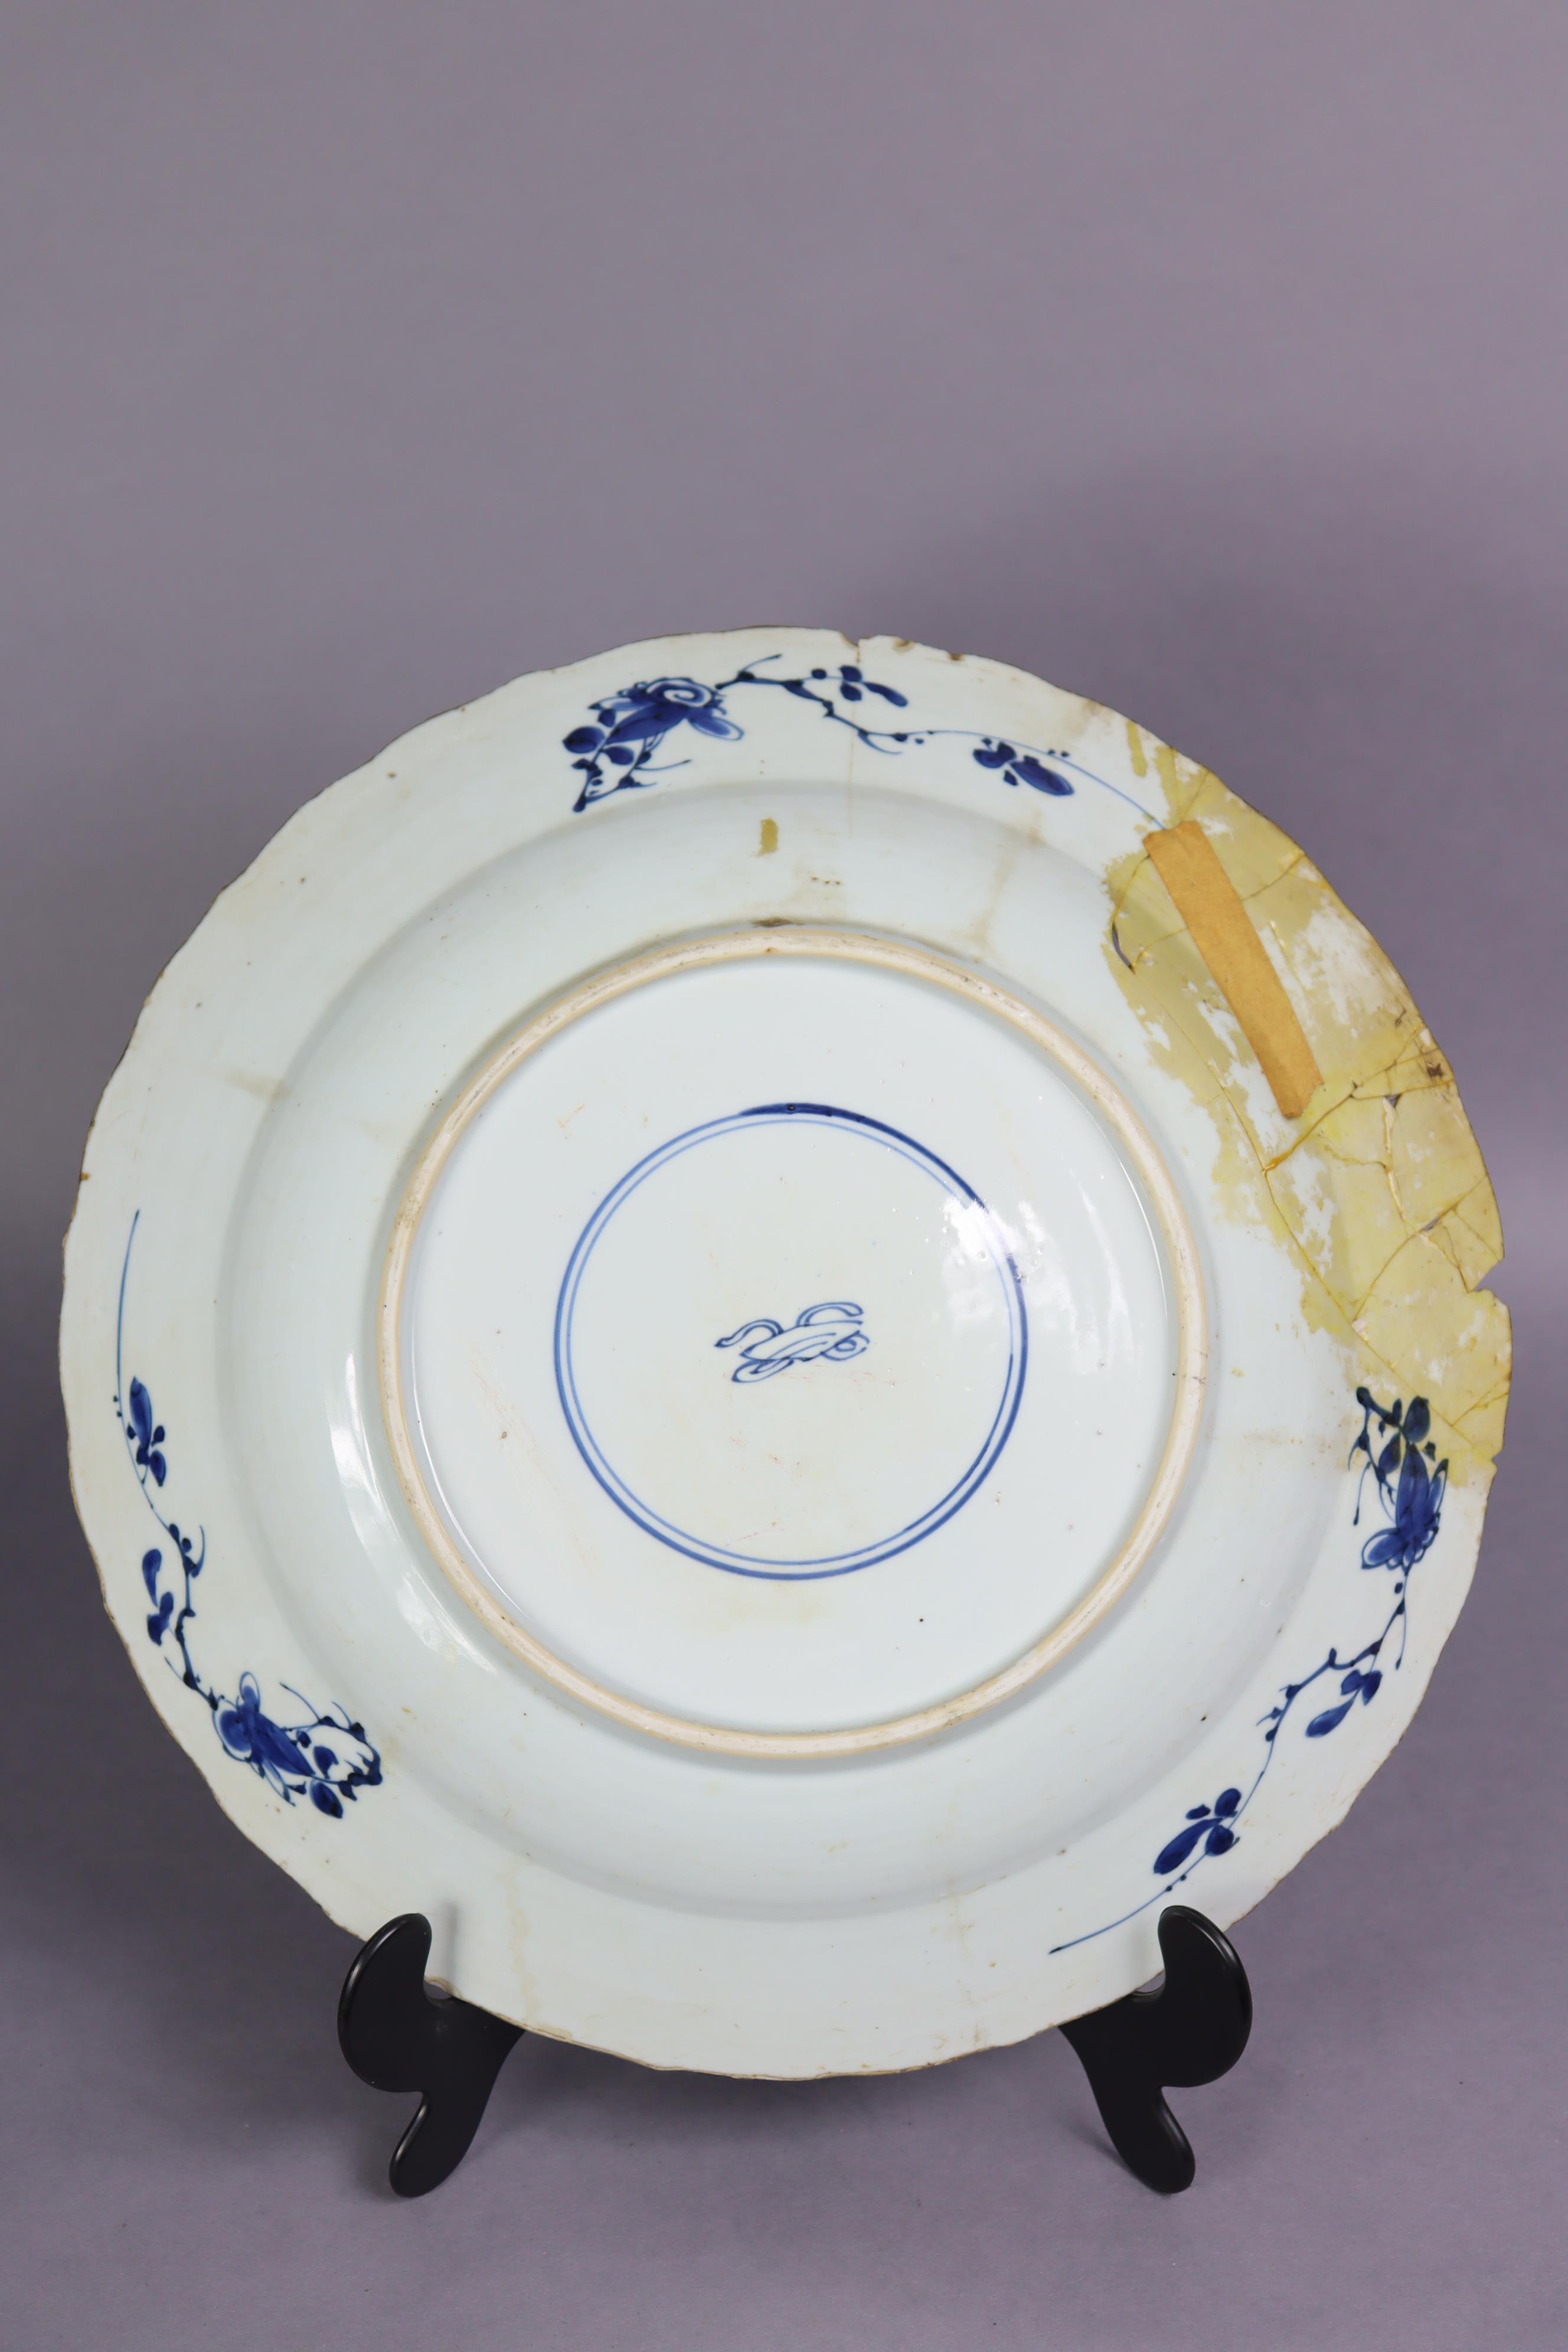 An 18th century Chinese blue & white porcelain large shallow bowl decorated with peonies on a scaled - Image 6 of 6